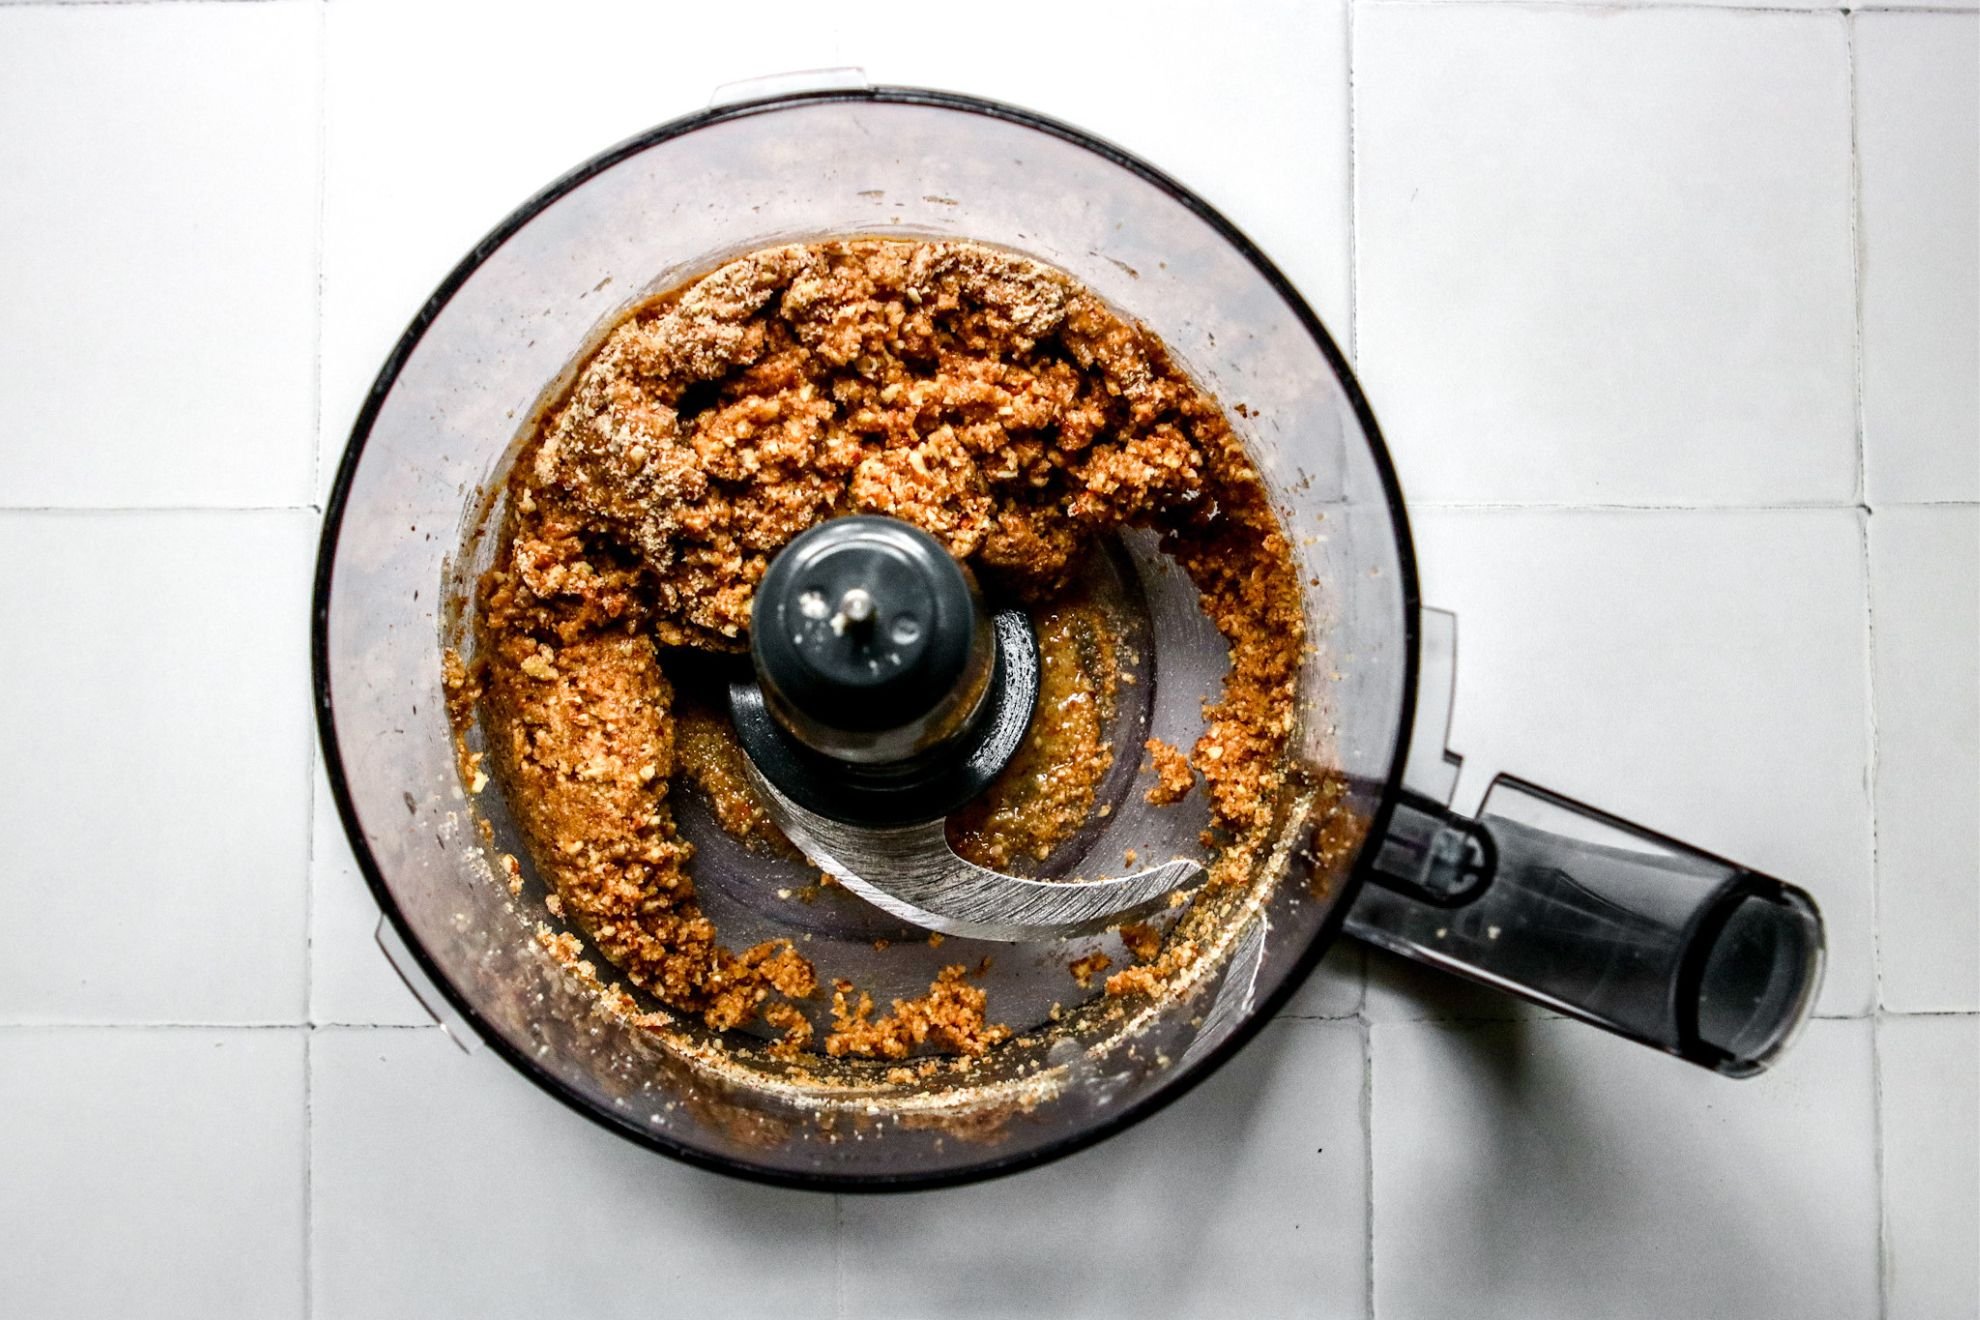 This is an overhead horizontal image of a food processor with a wet, crumbly nutty mixture. The clear plastic food processor bowl sits on a white square tile surface. The handle of the food processor is pointing to the right bottom corner of the image.